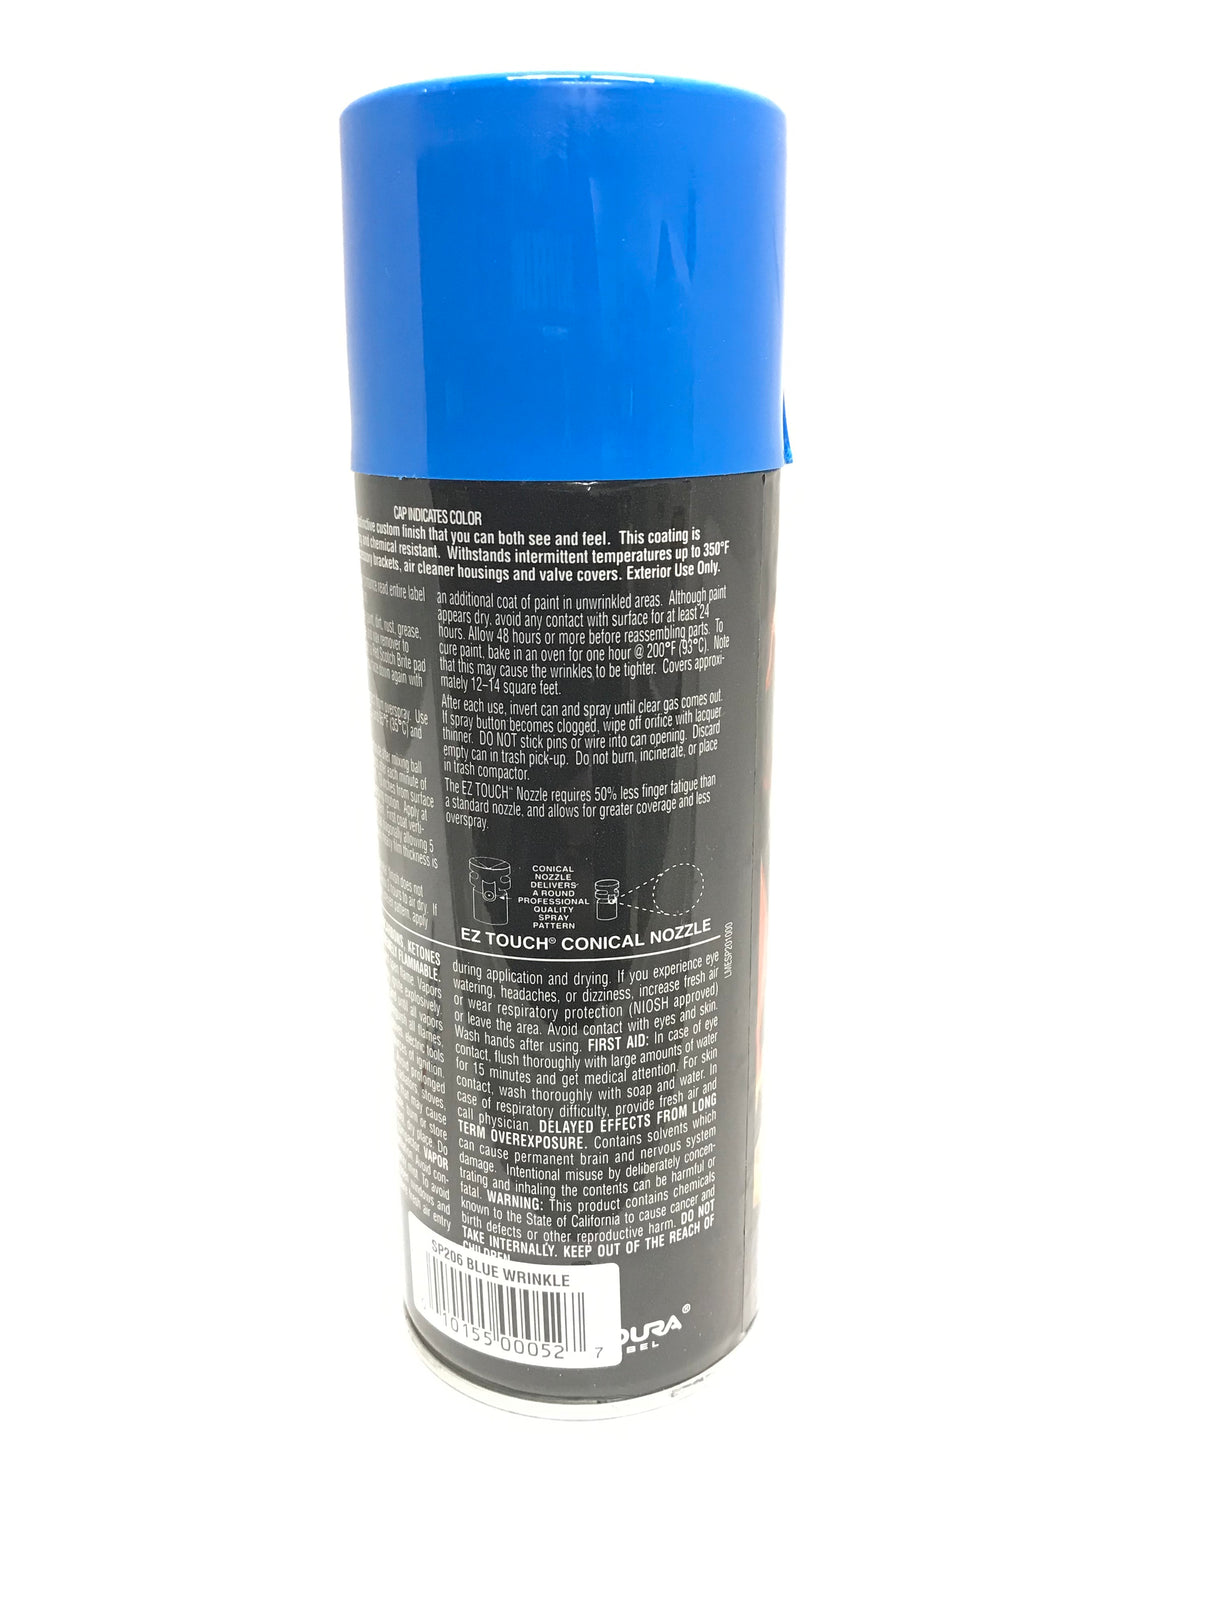 VHT SP206-4 PACK BLUE High Temperature Wrinkle Finish Durable Texture Coating - 11 oz